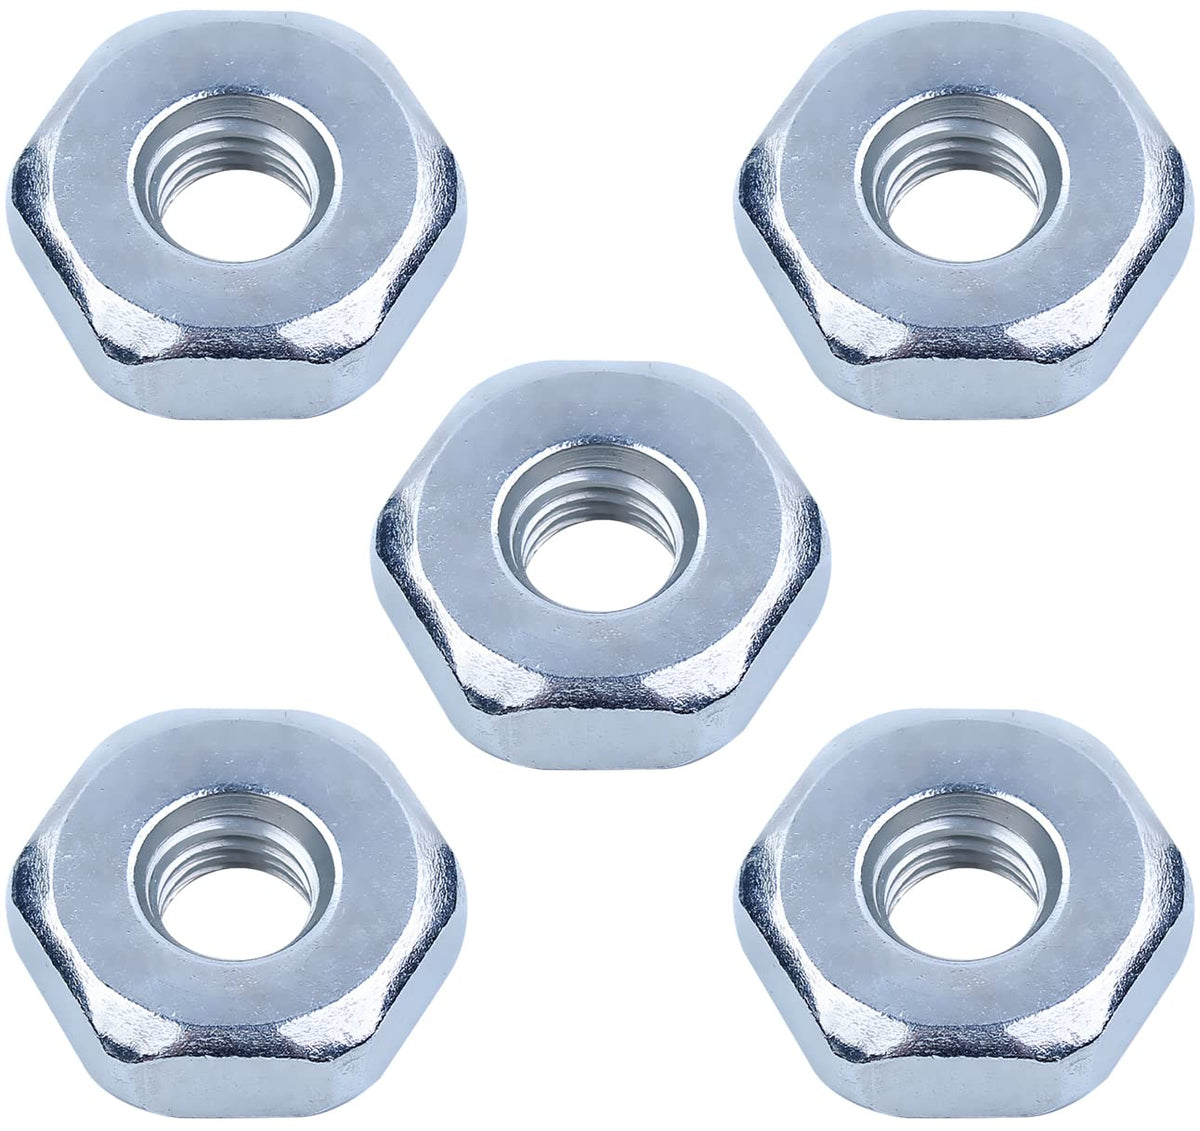 5 Pieces Sprocket Cover Nuts for STIHL Chainsaw MS170 MS171 MS180 MS181 MS250 MS251 MS211 MS390 and More Models, AUMEL Stainless Steel M8 Nuts Universal Bar Cover Nut Parts